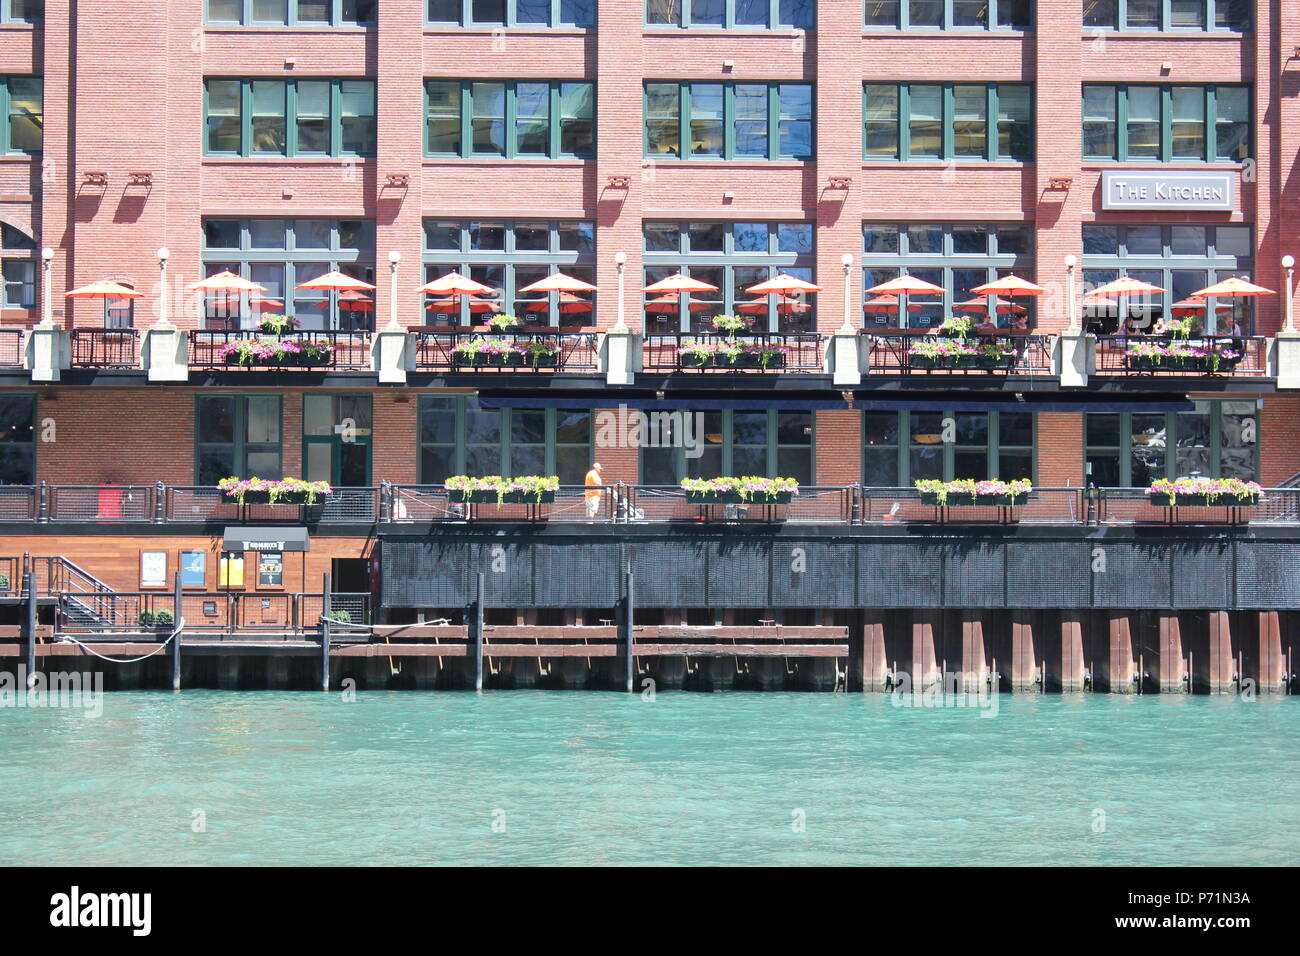 Downtown riverside building and cafe along Chicago's scenic and modern downtown river walk along the Chicago River and Wacker Drive. Stock Photo